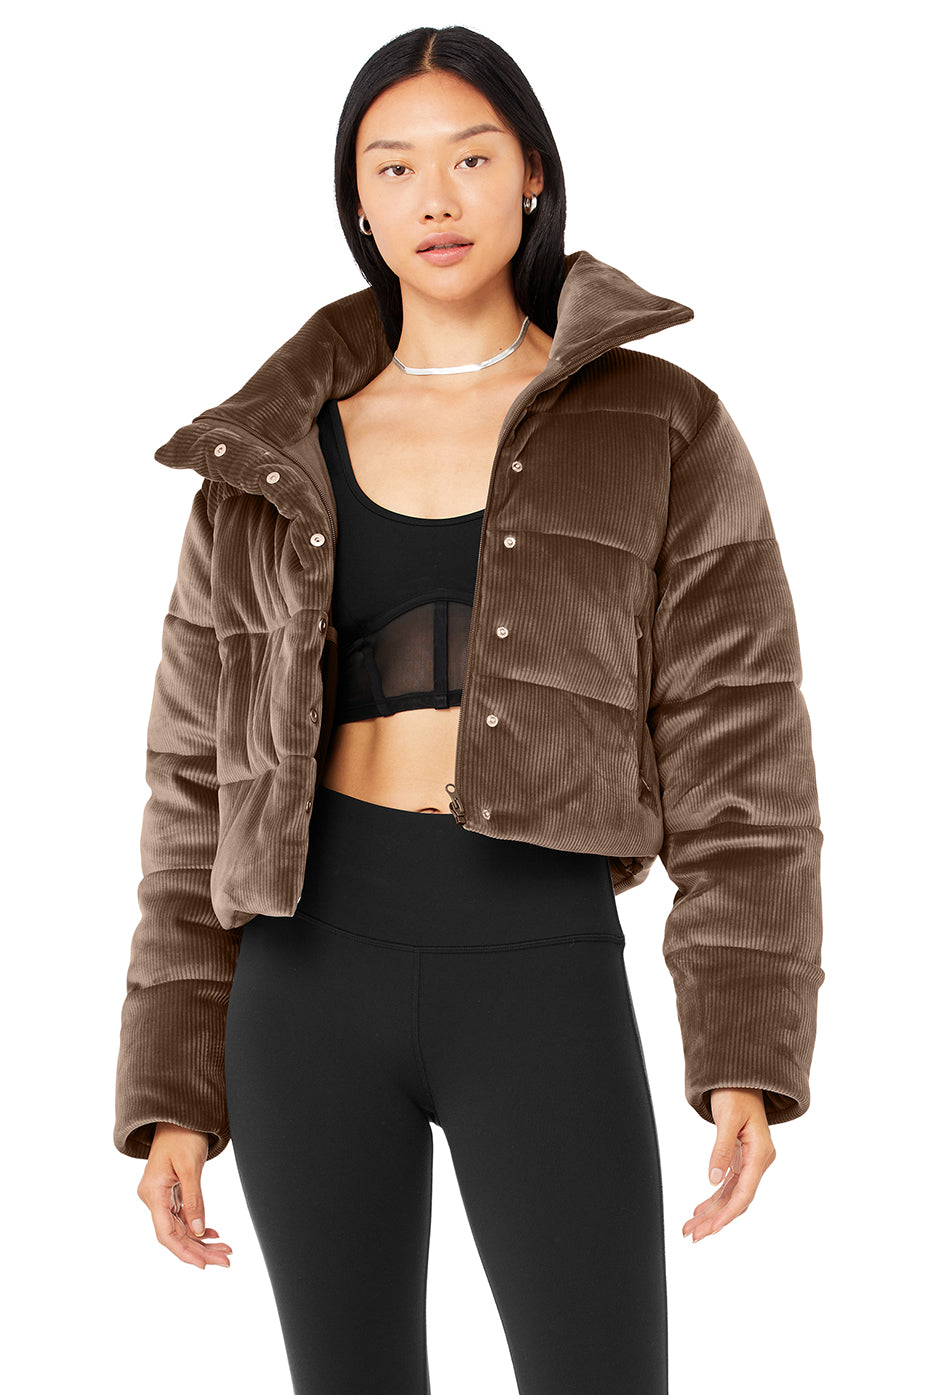 Ribbed Velour Gold Rush Puffer Jacket in Hot Cocoa by Alo Yoga